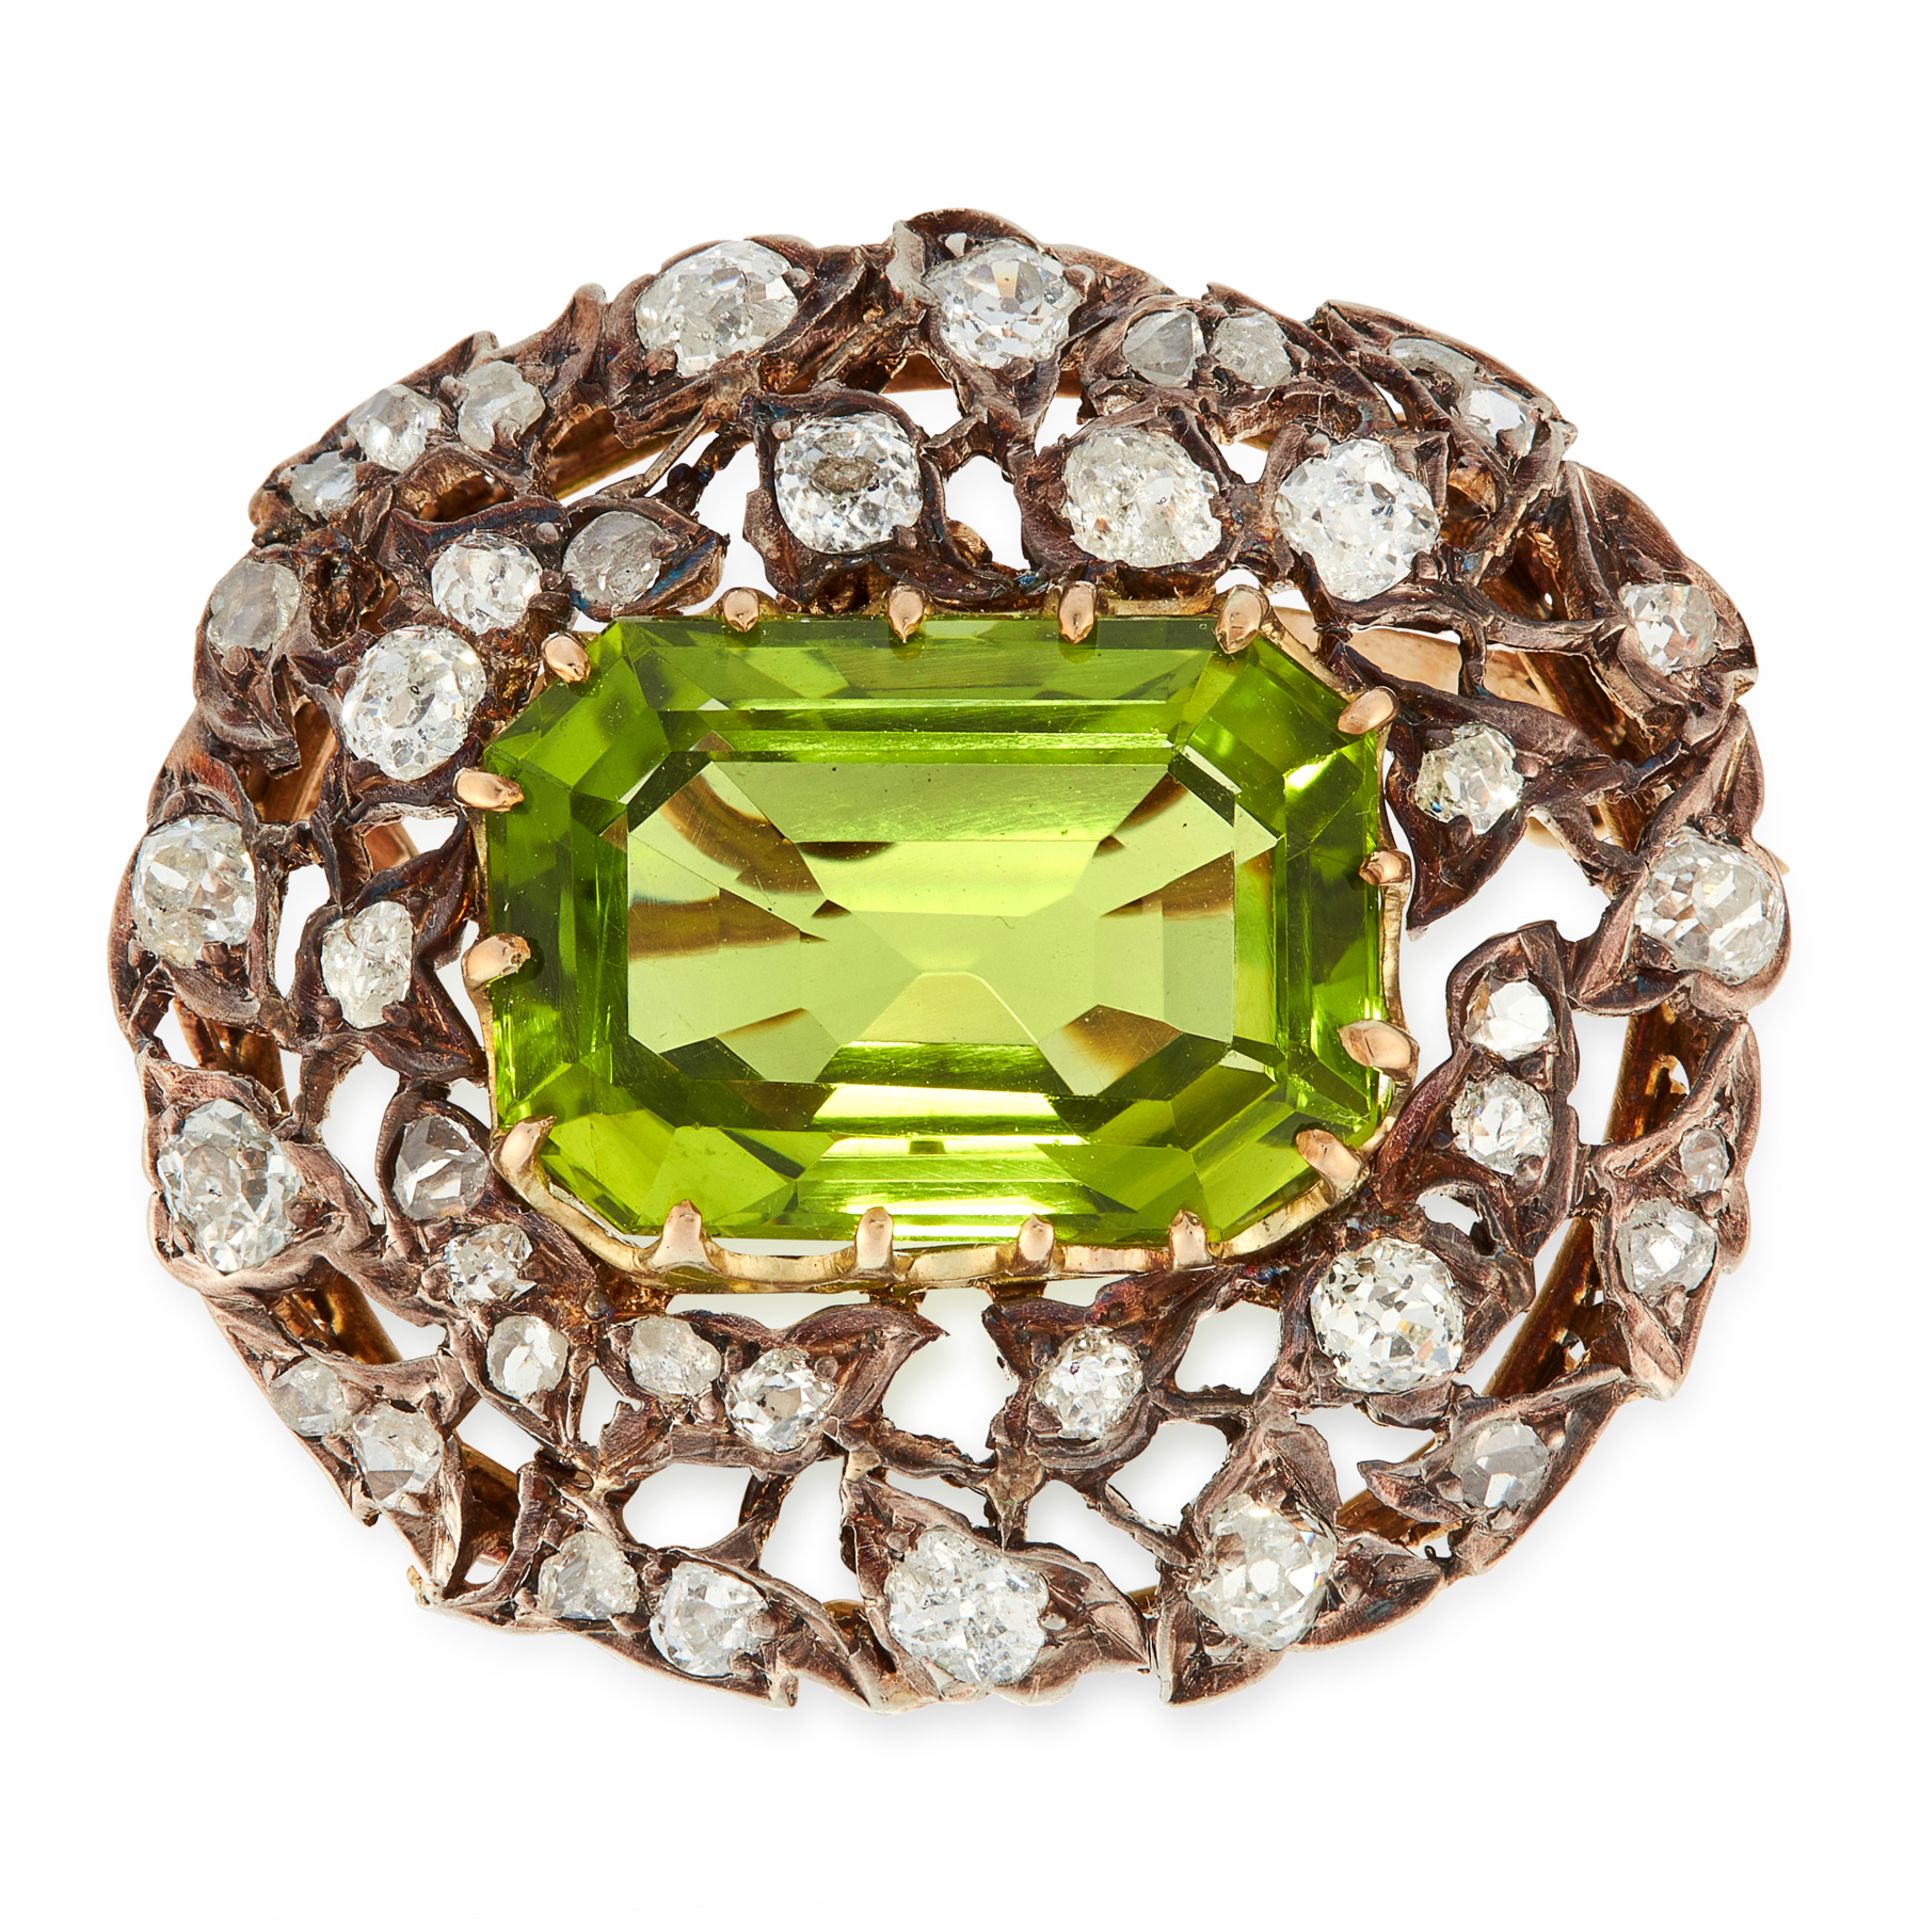 AN ANTIQUE PERIDOT AND DIAMOND BROOCH, 19TH CENTURY in yellow gold and silver, set with an emerald - Image 2 of 2